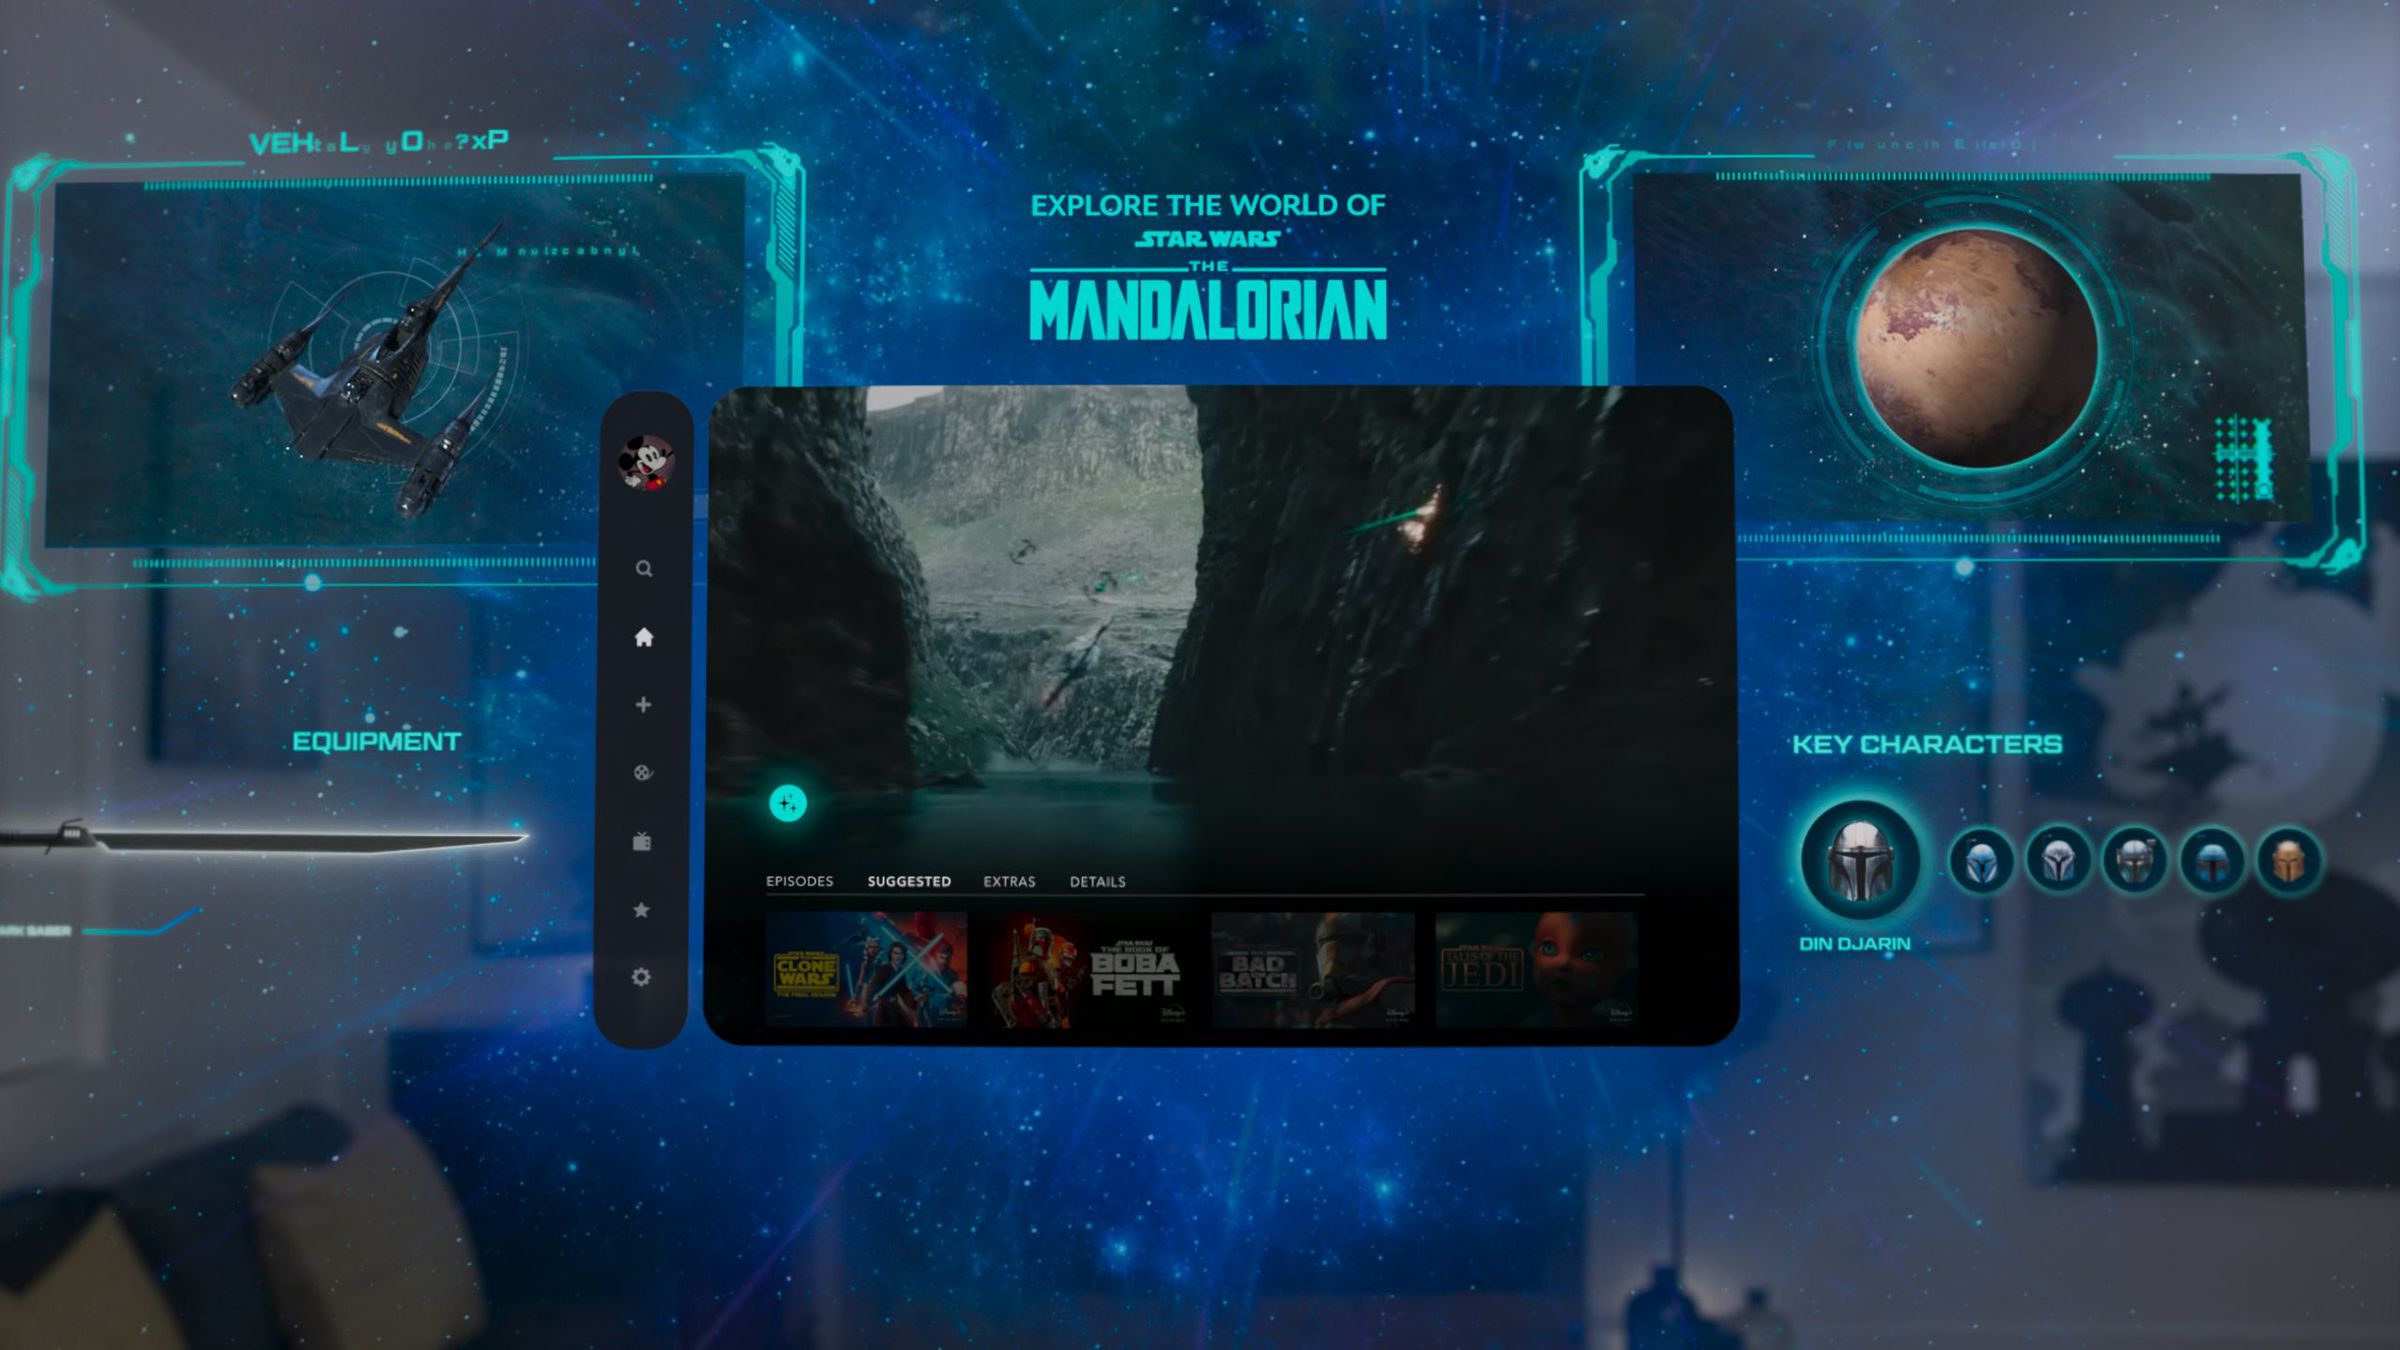 Windows of Mandalorian-themed content in a video render of the Apple Vision Pro.